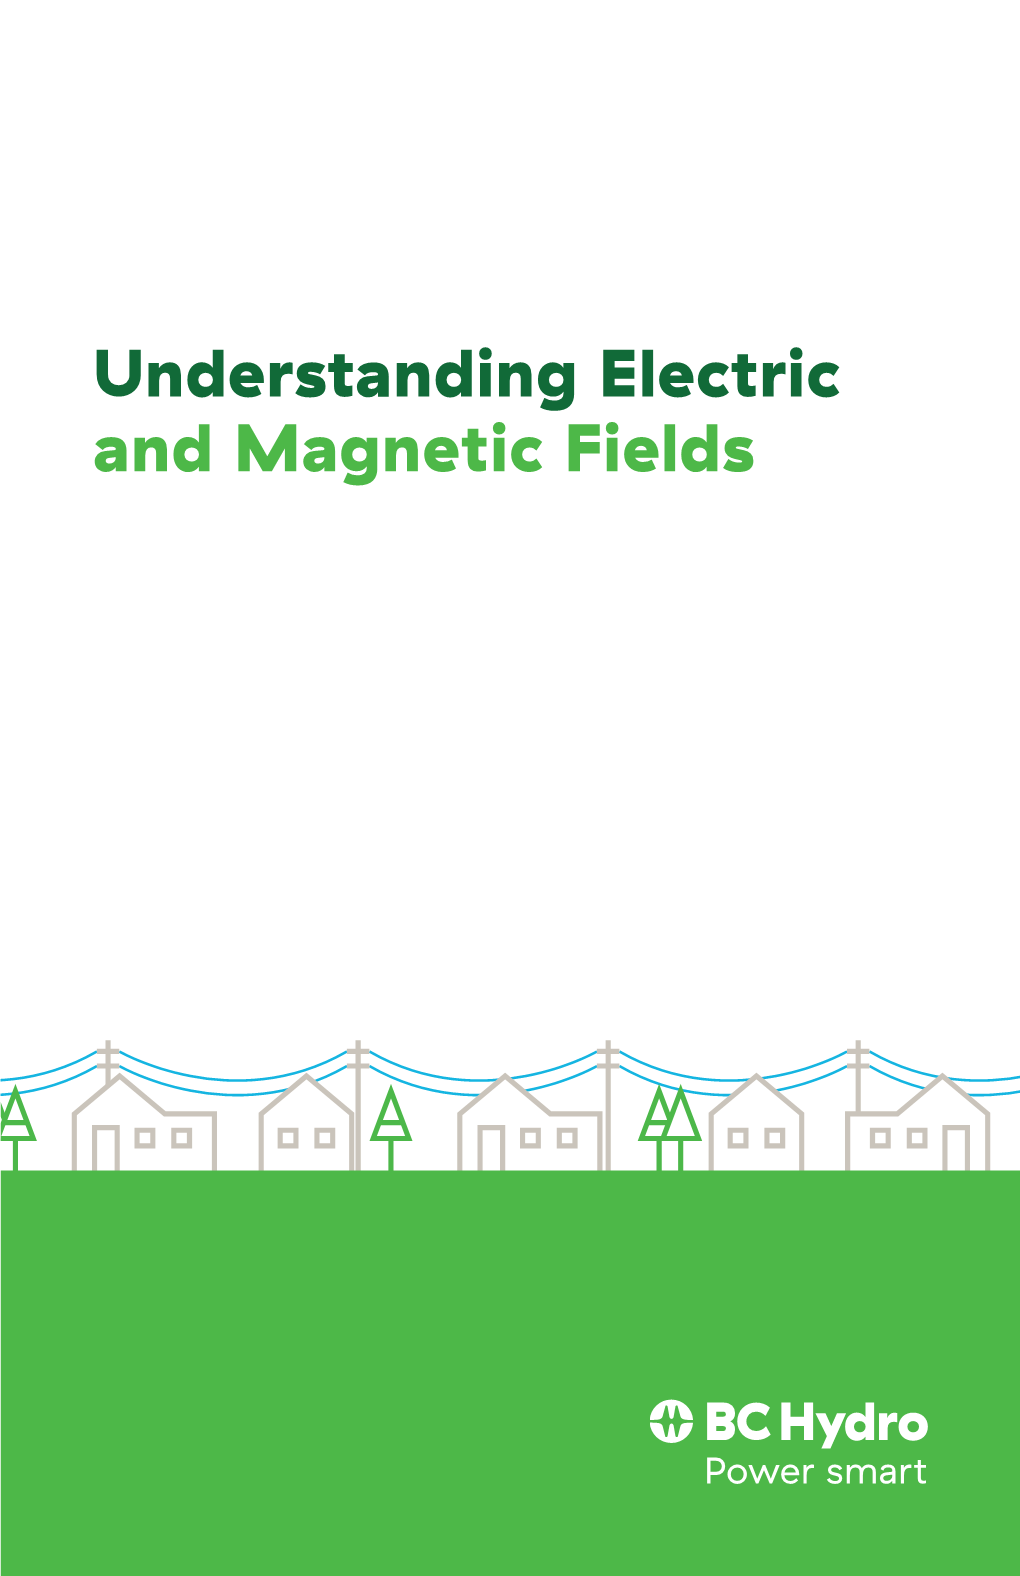 Understanding Electric and Magnetic Fields Booklet